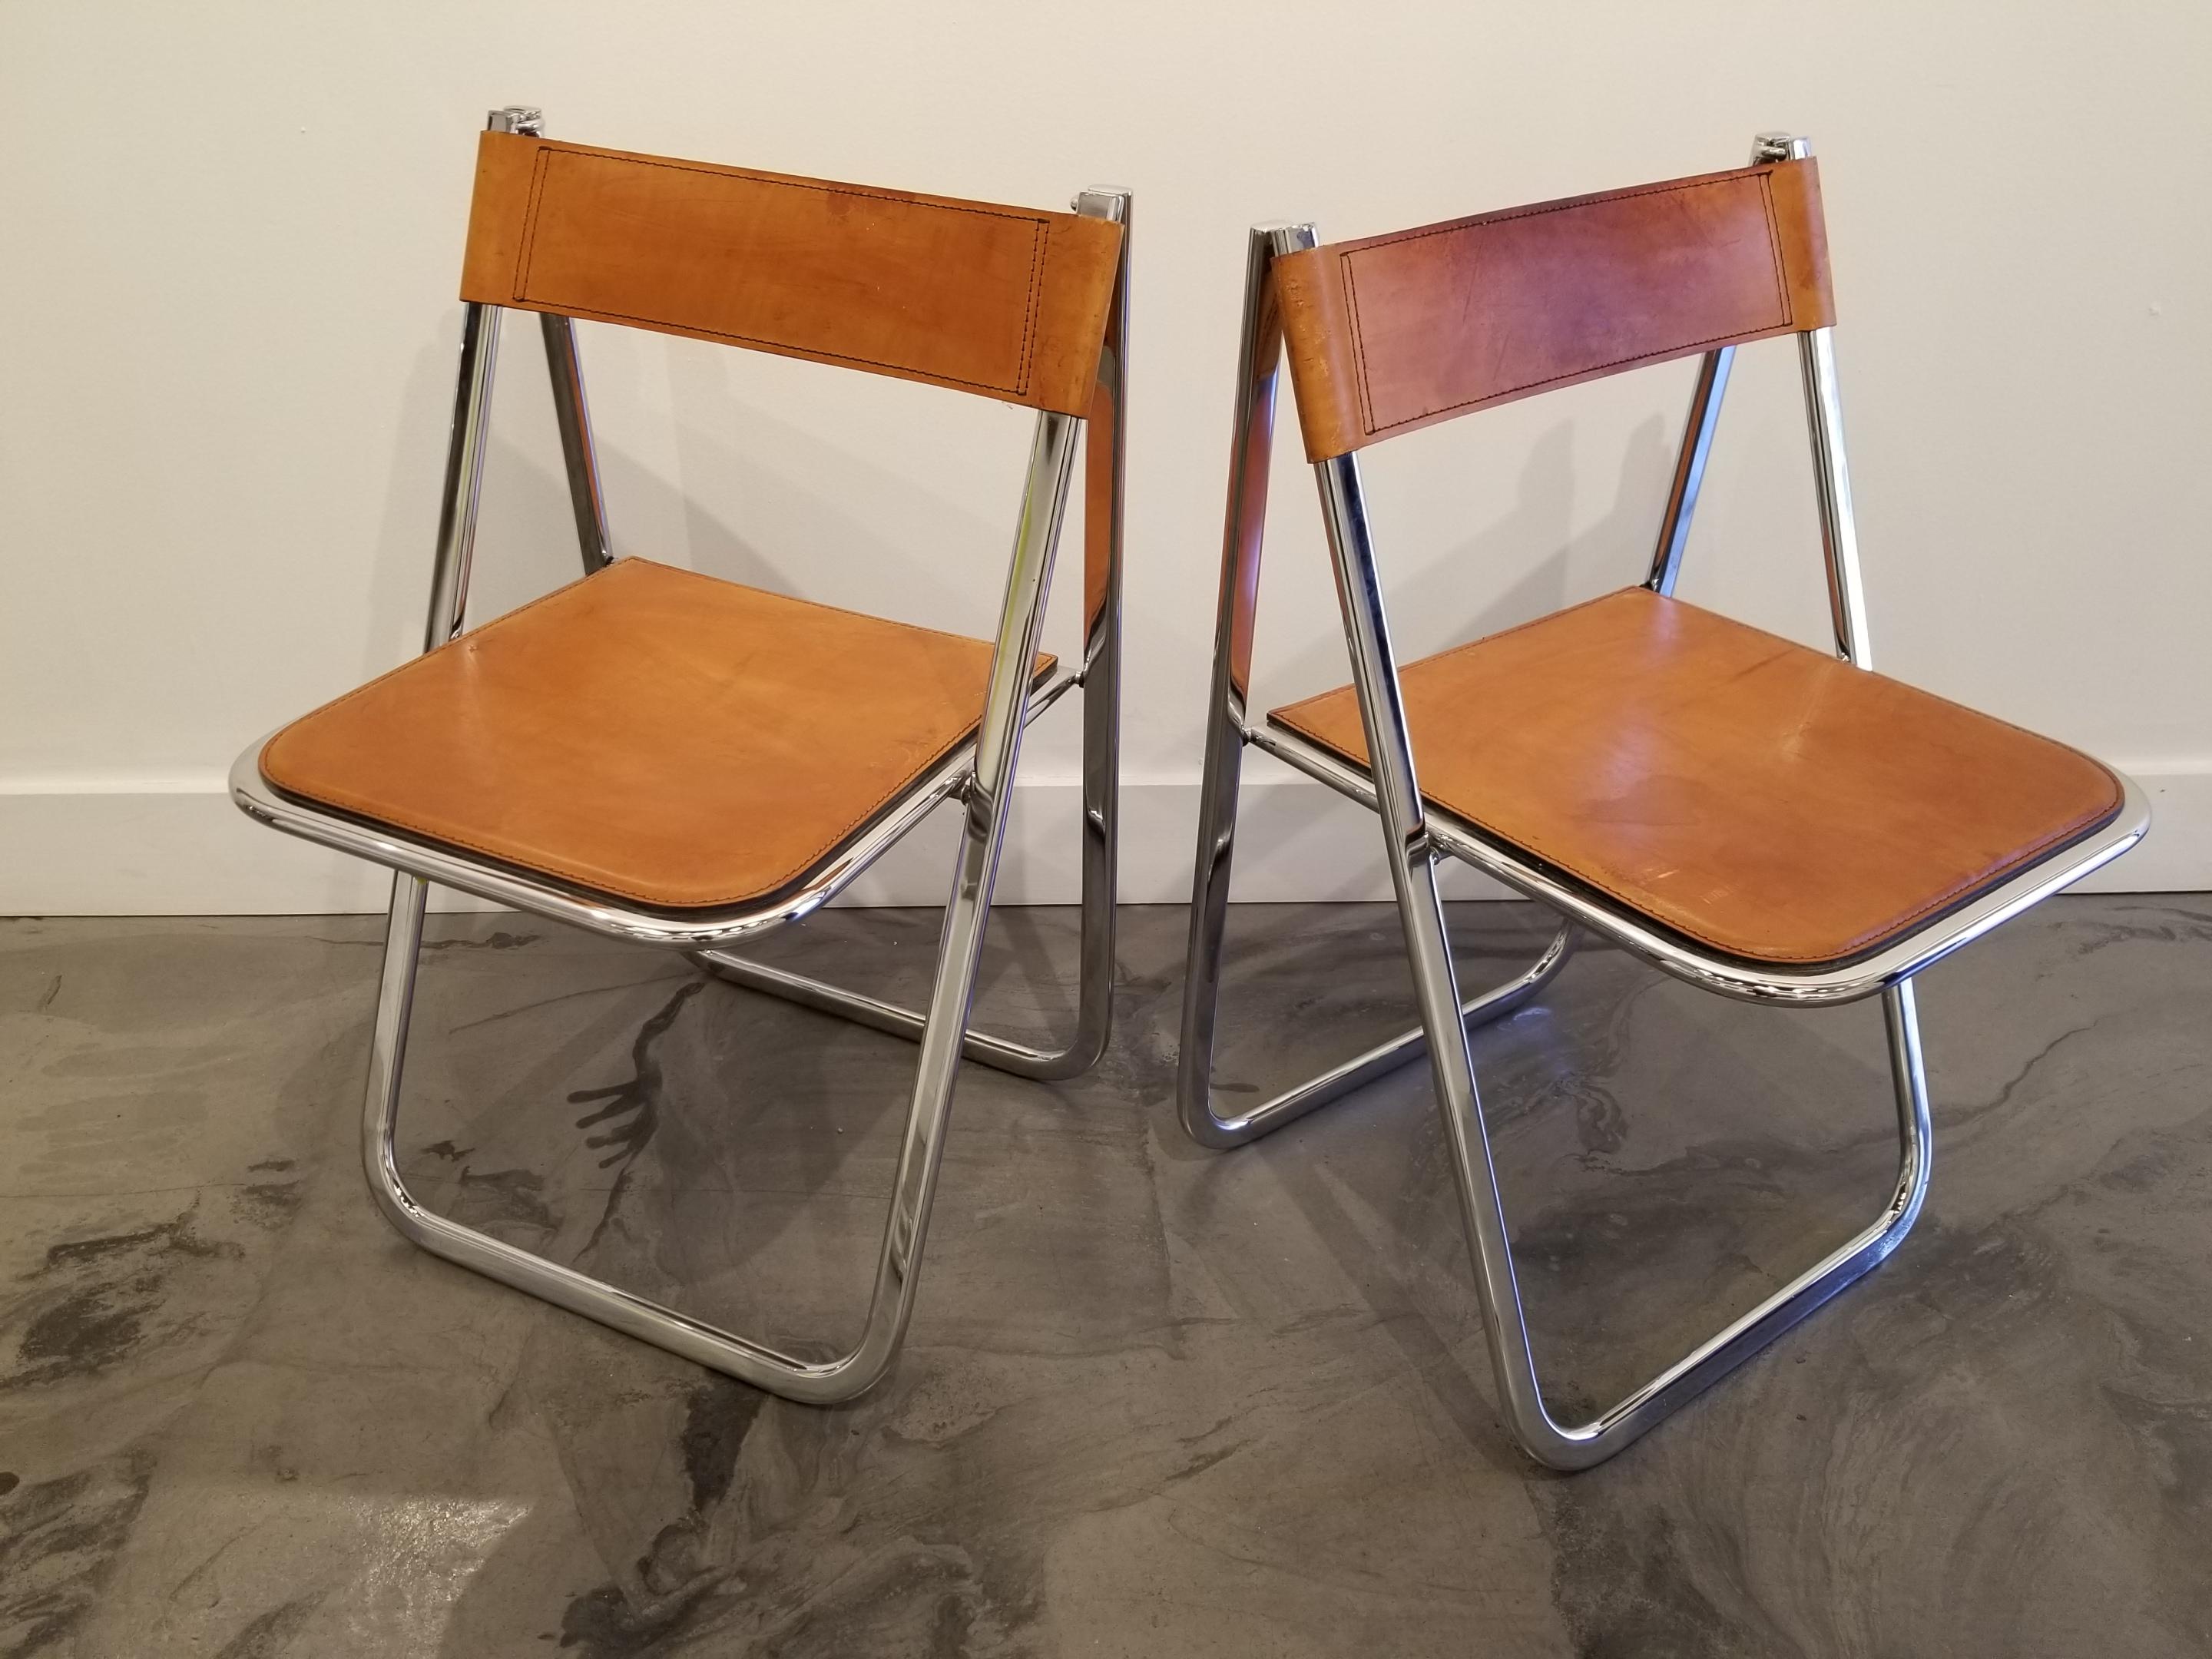 A pair of chrome and leather folding dining chairs by Arrben, Italy, circa 1970s. Makers mark impressed in leather seat and cast into chrome frame. Chrome frames in excellent vintage condition, caramel color leather has beautiful patina.